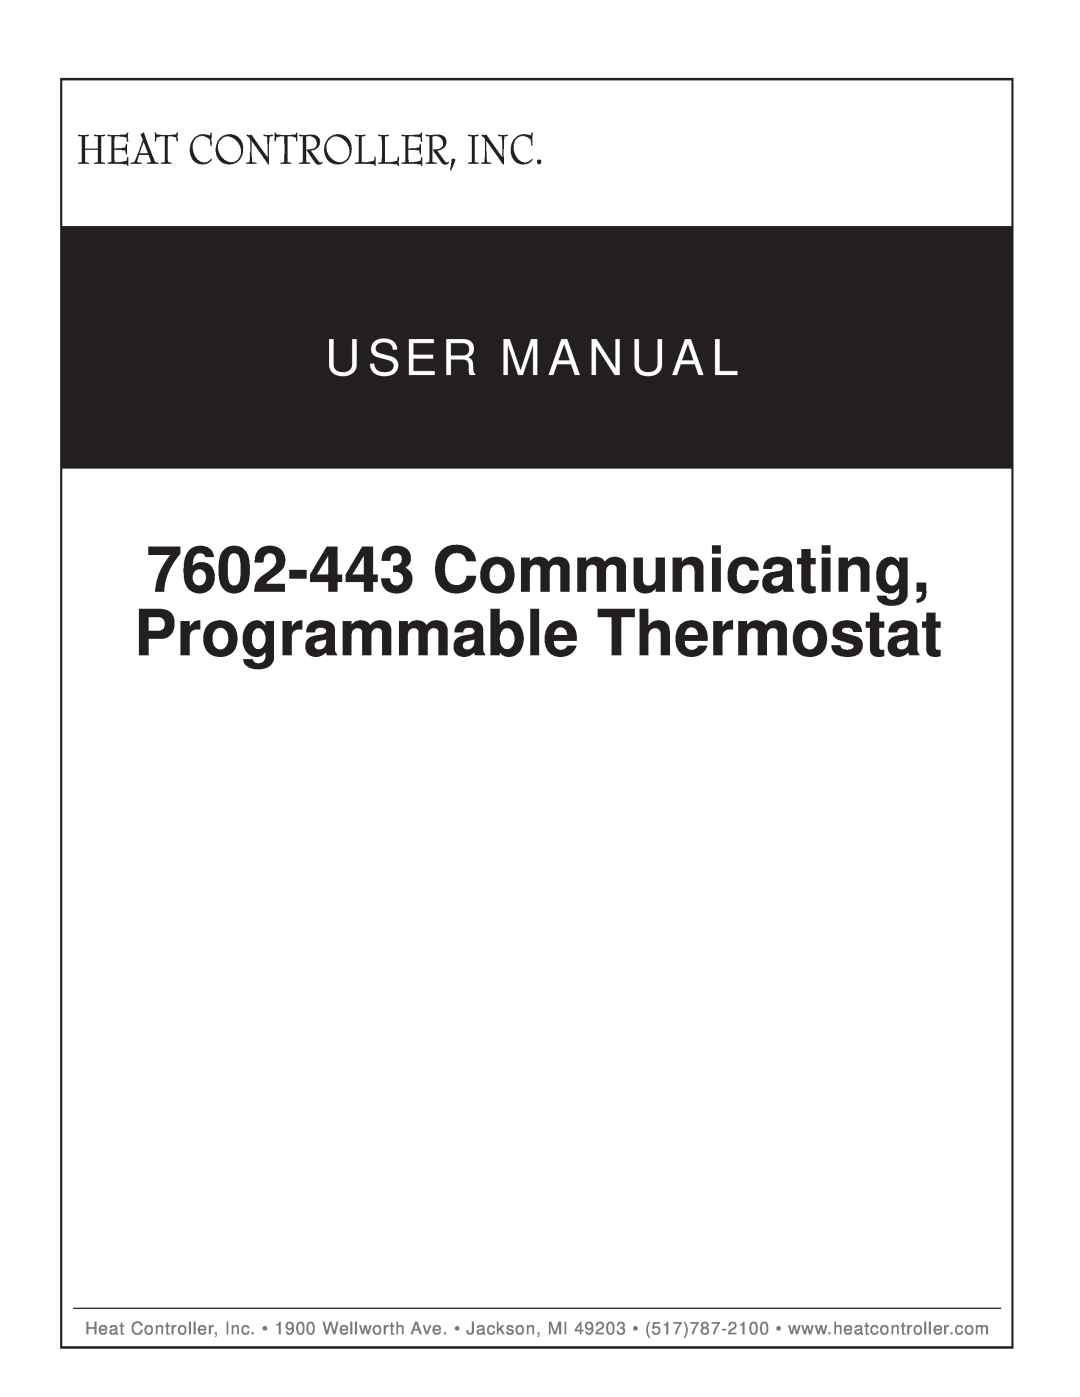 Heat Controller user manual 7602-443Communicating, Programmable Thermostat 